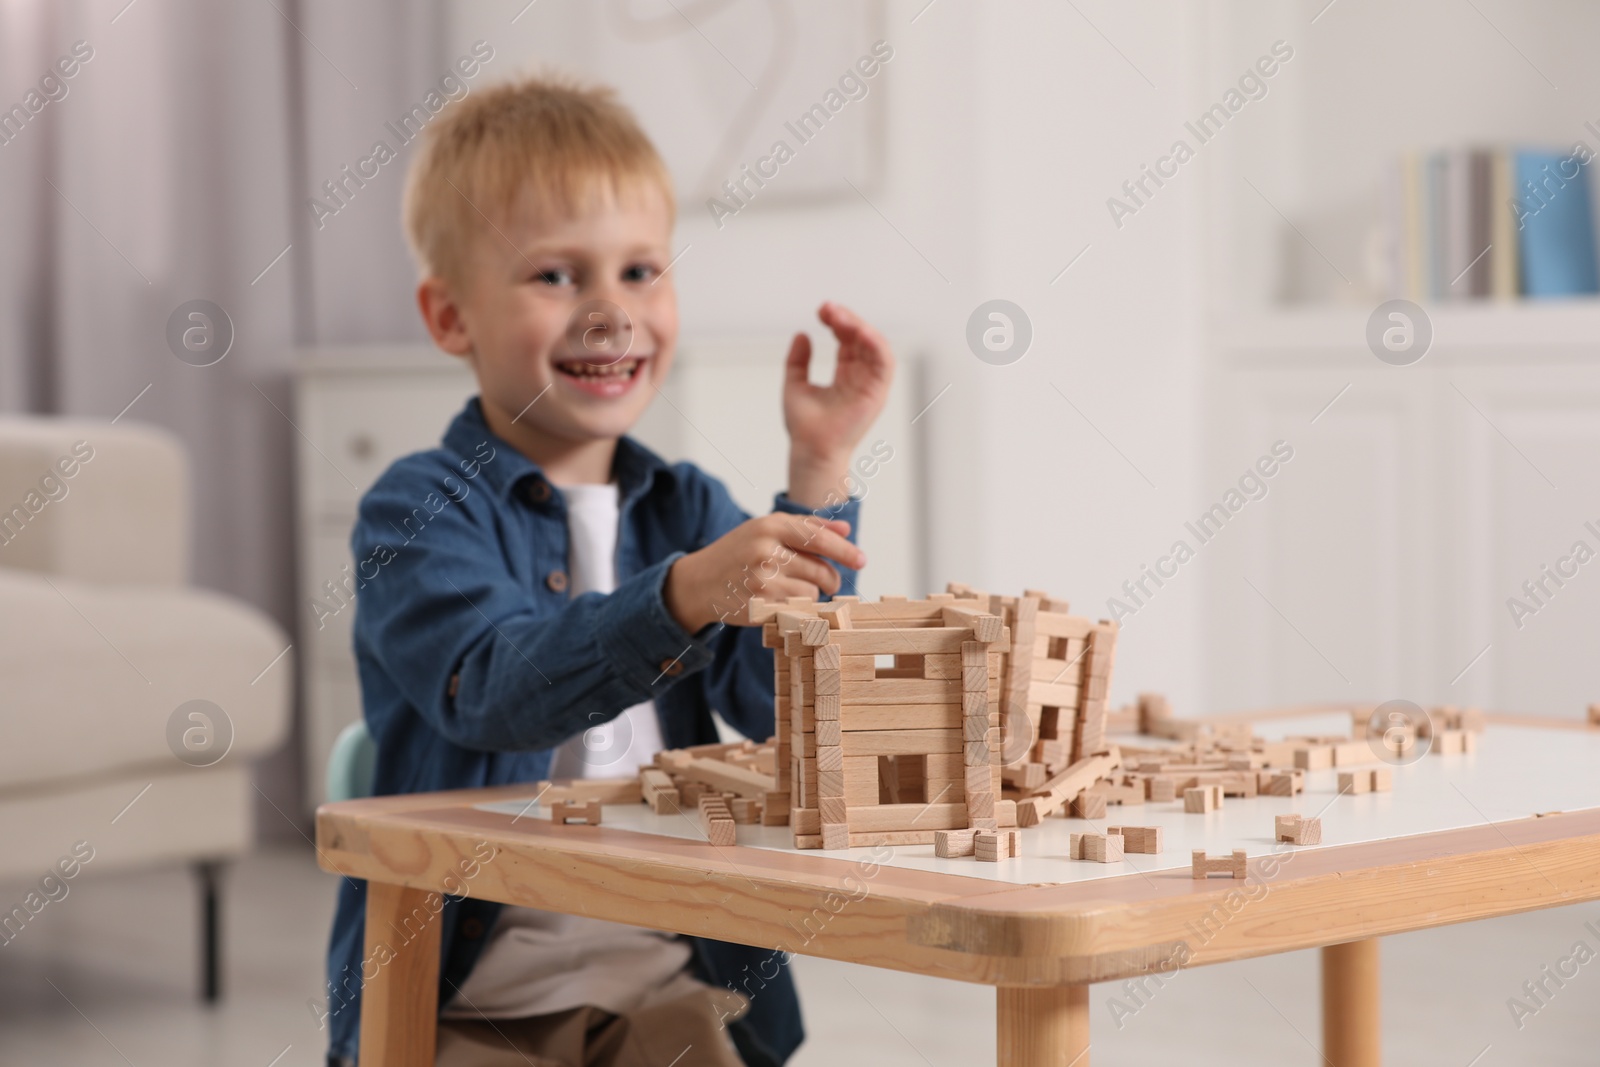 Photo of Cute little boy playing with wooden blocks at table indoors, selective focus. Child's toy